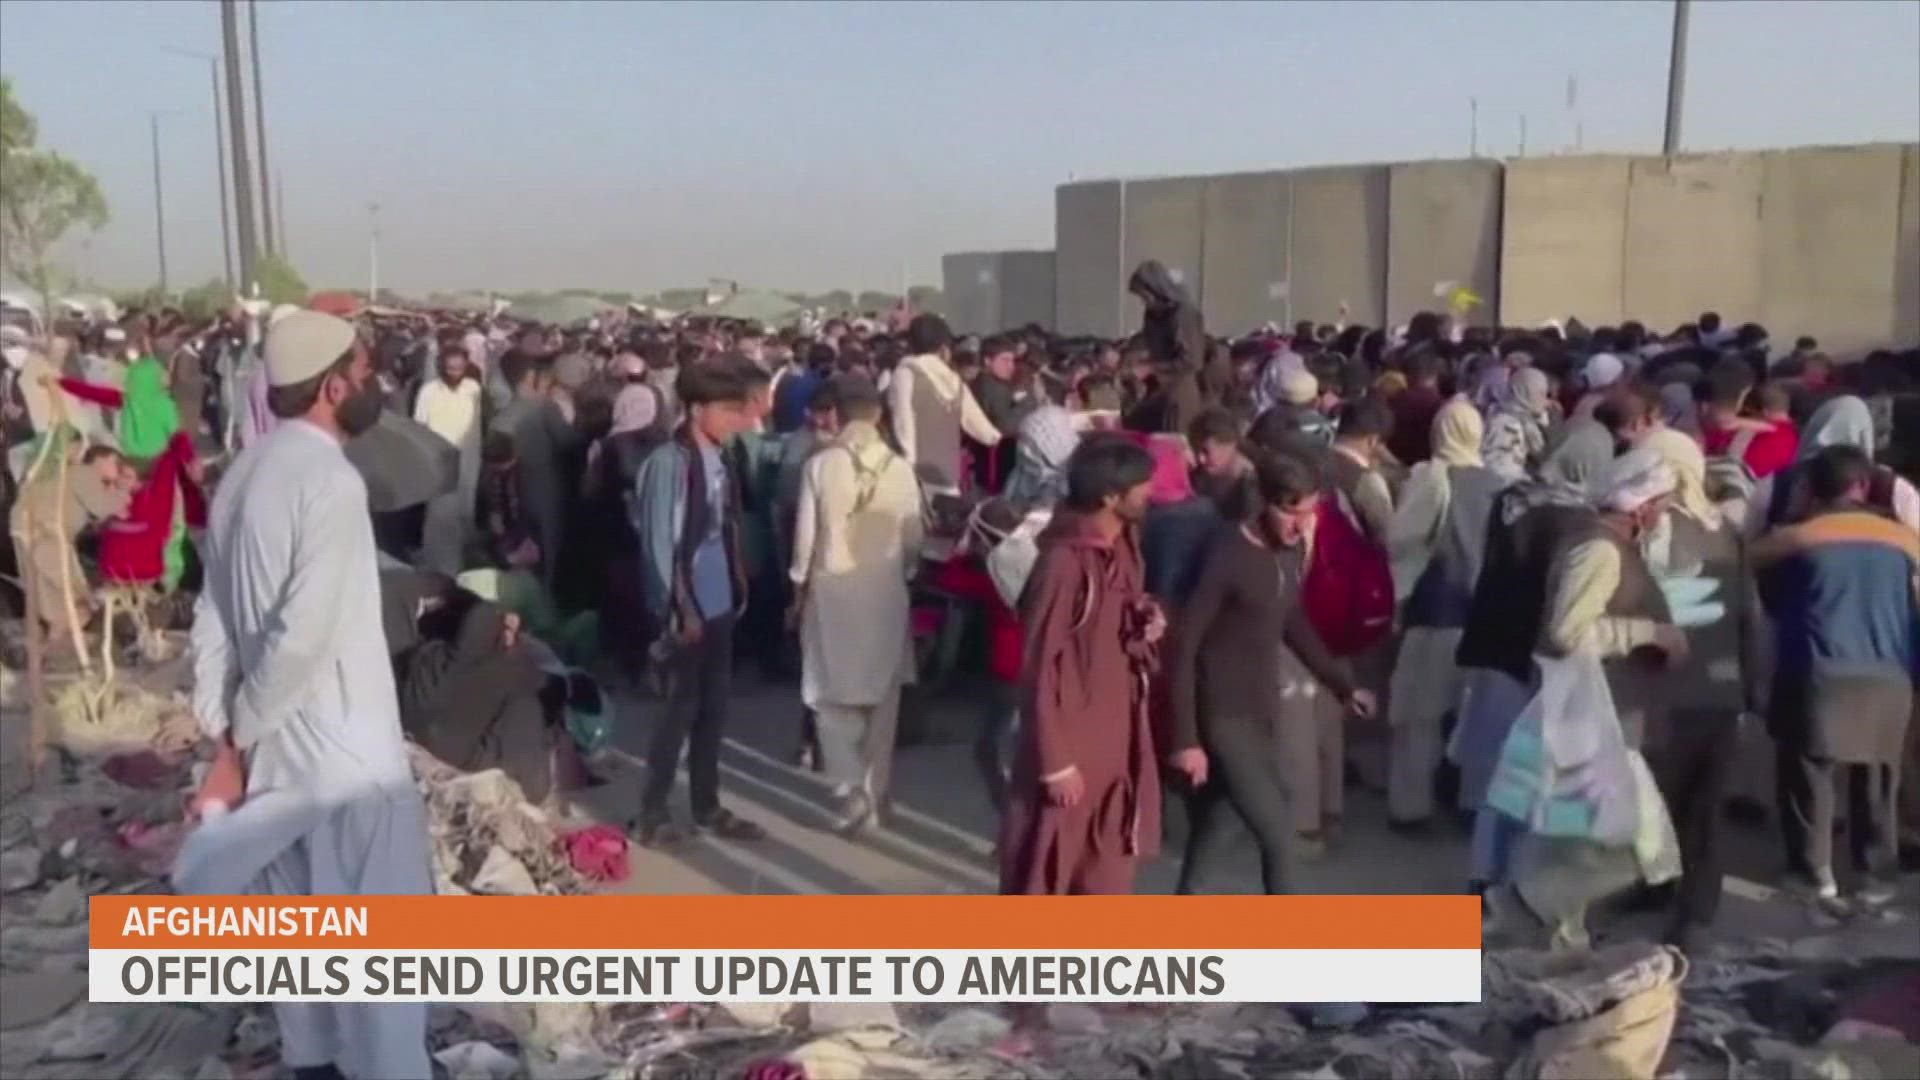 The blasts happened outside the airport, where thousands of Afghans have gathered hoping to join a U.S.-led airlift after the Taliban takeover.